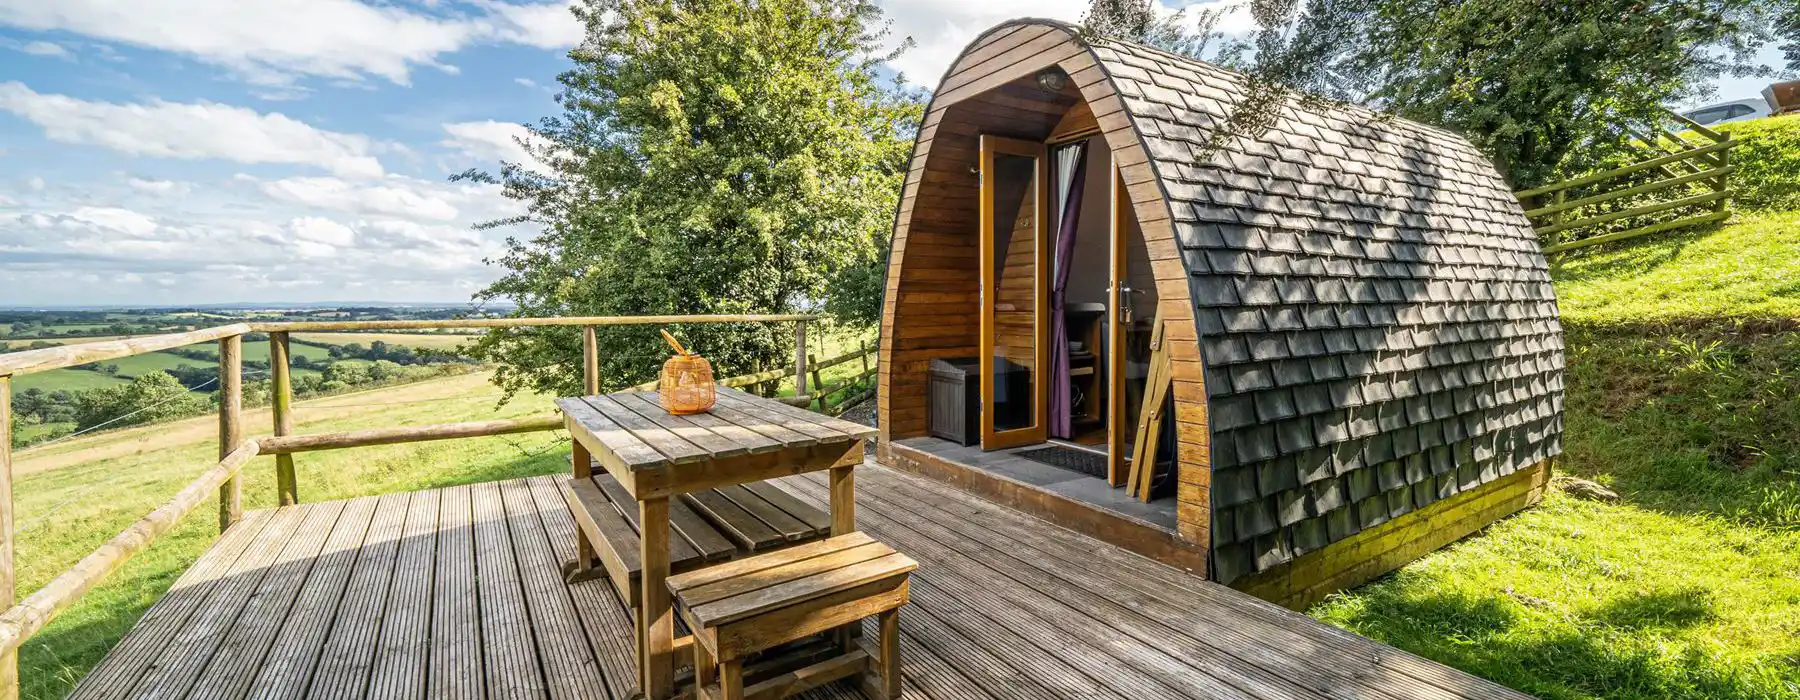 Camping pods in Derbyshire and the Peak District